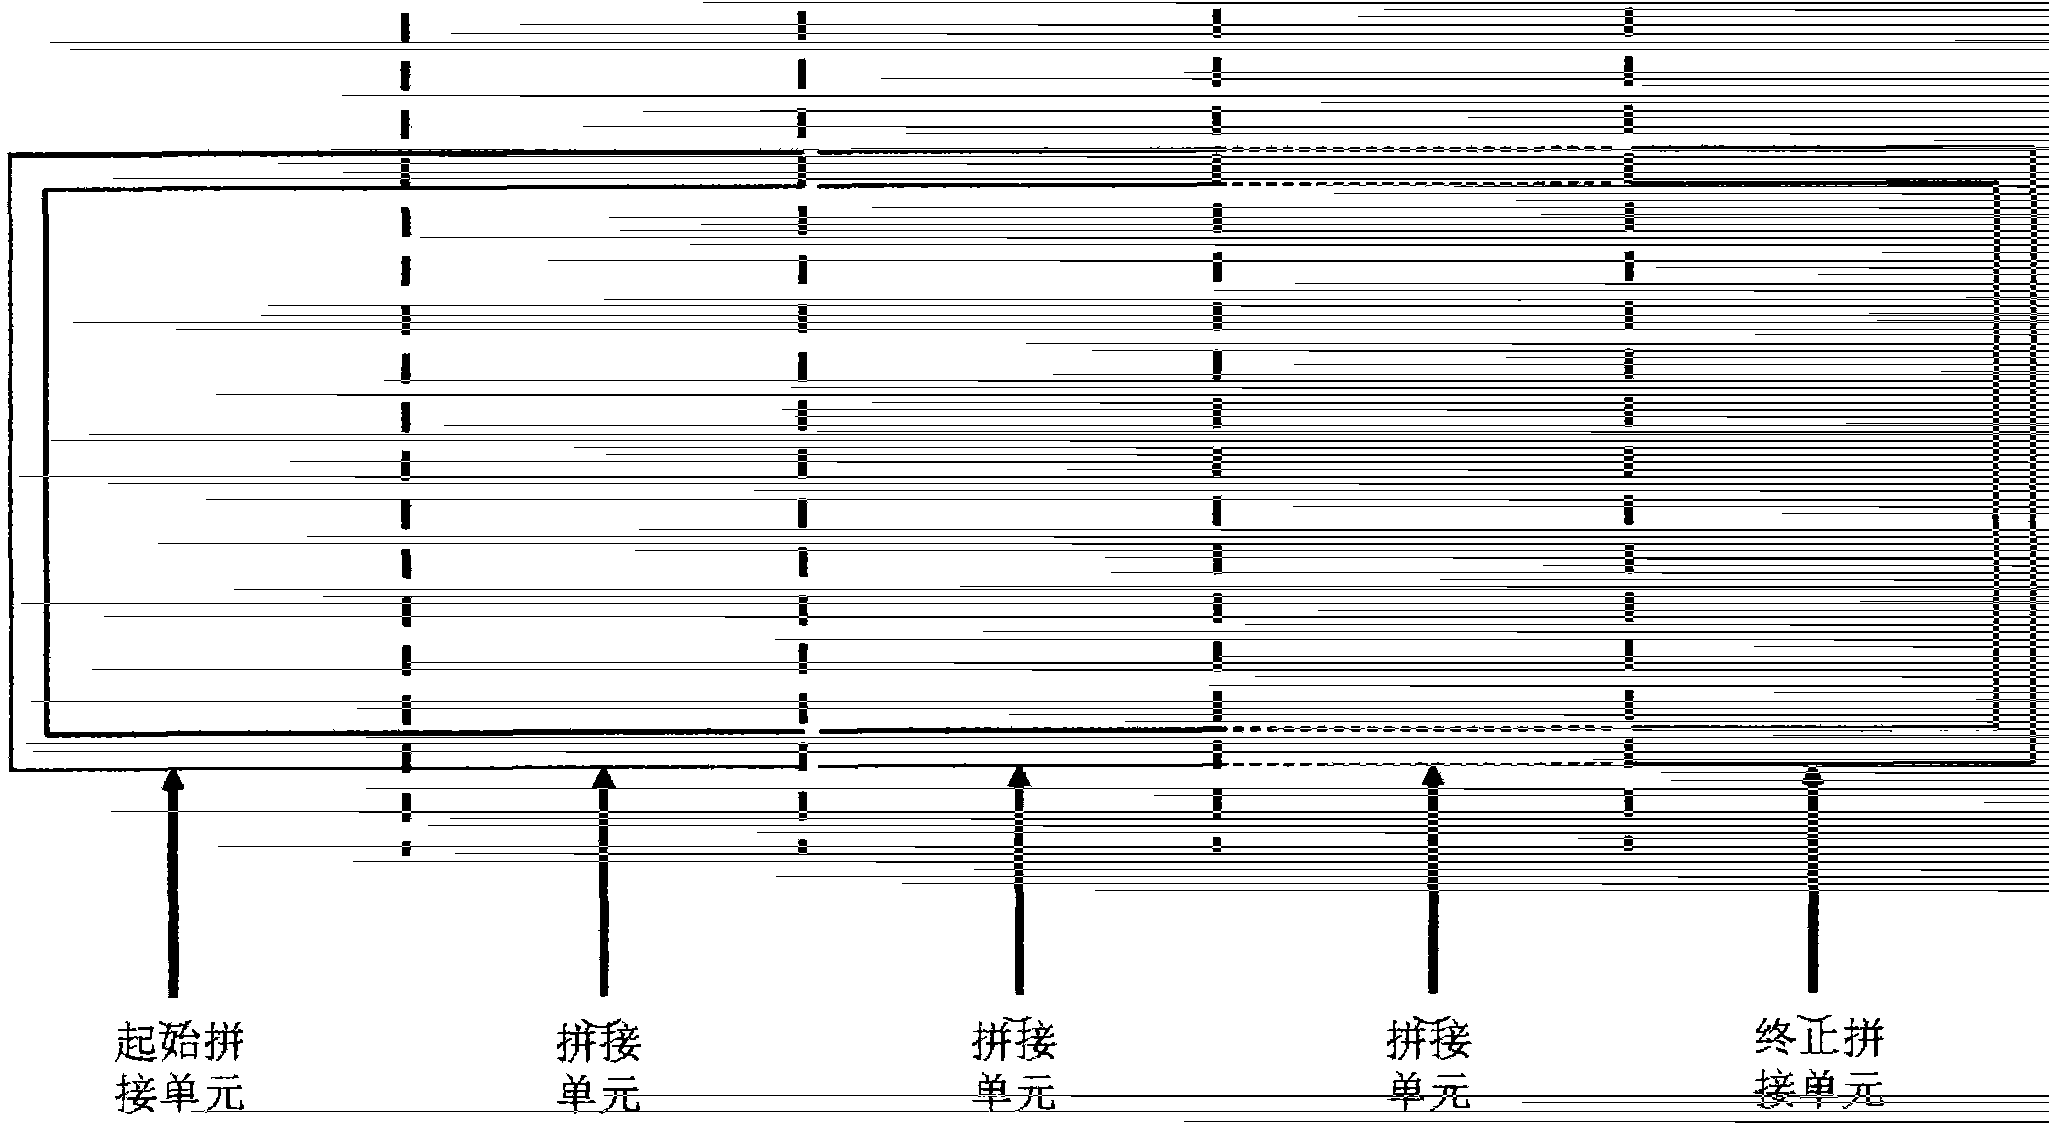 Multi-point touch interaction splicing method